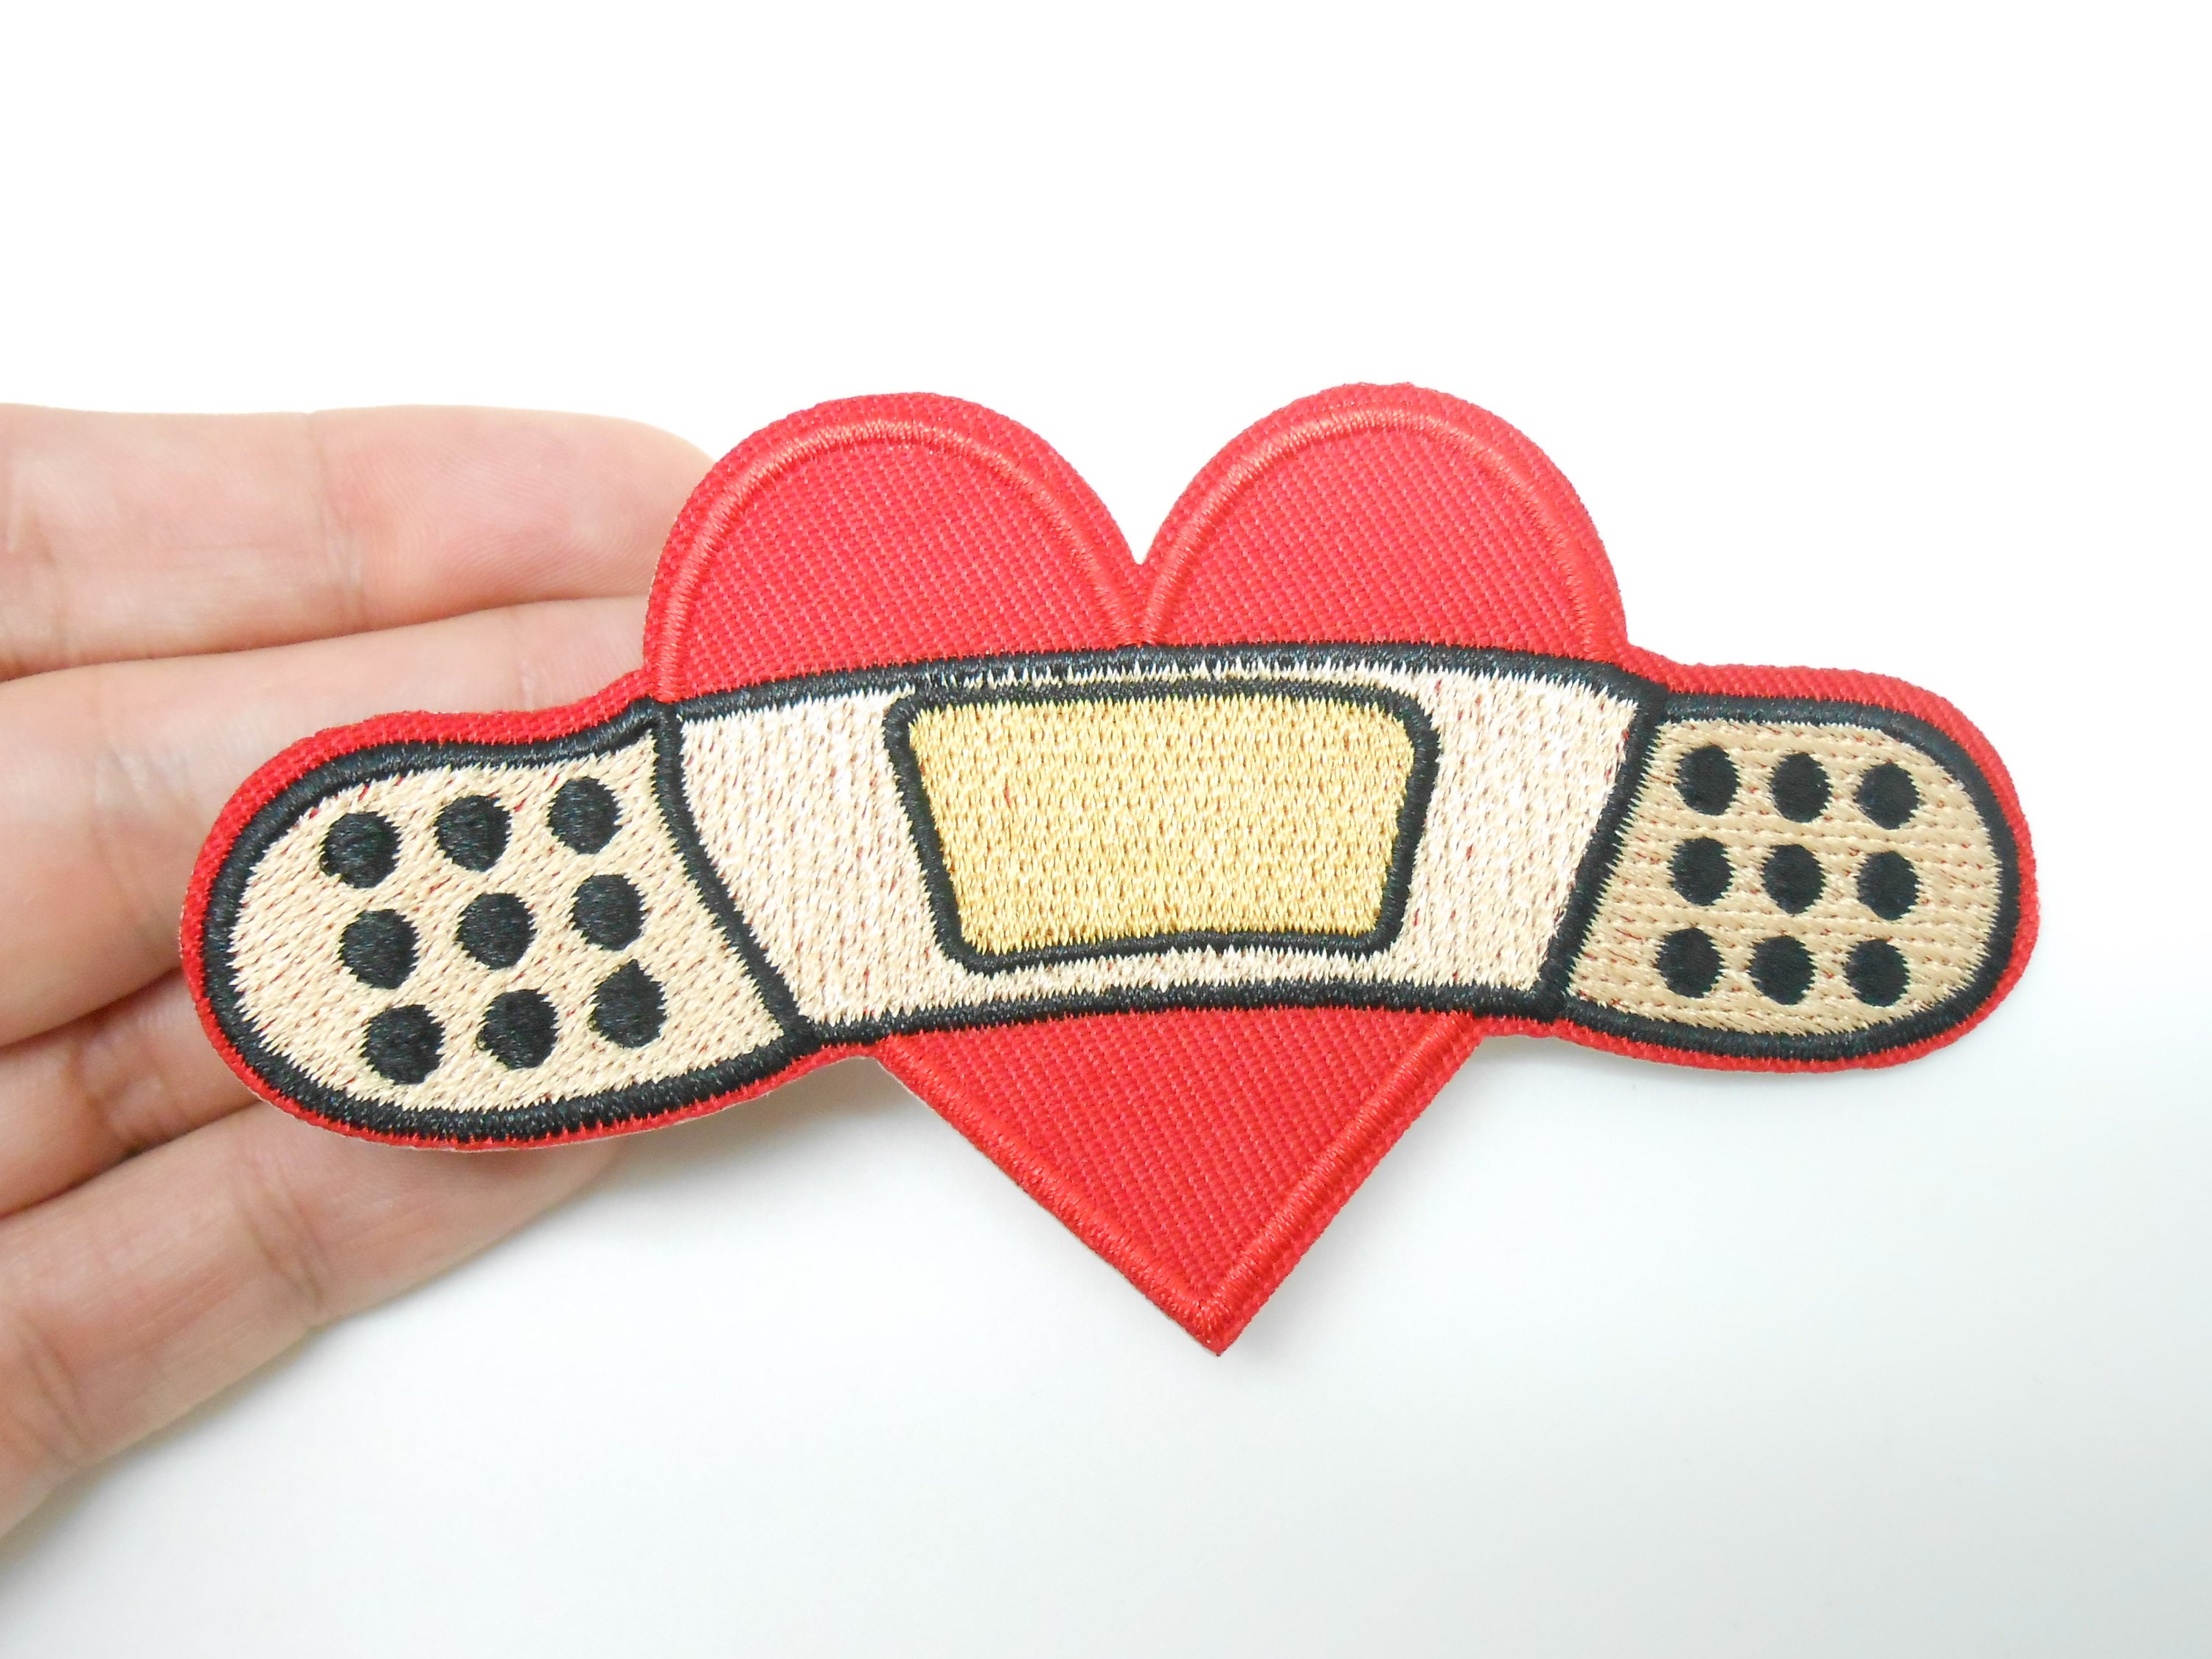 Bandage Patch  Embroidered patches, Sticker patches, Patches